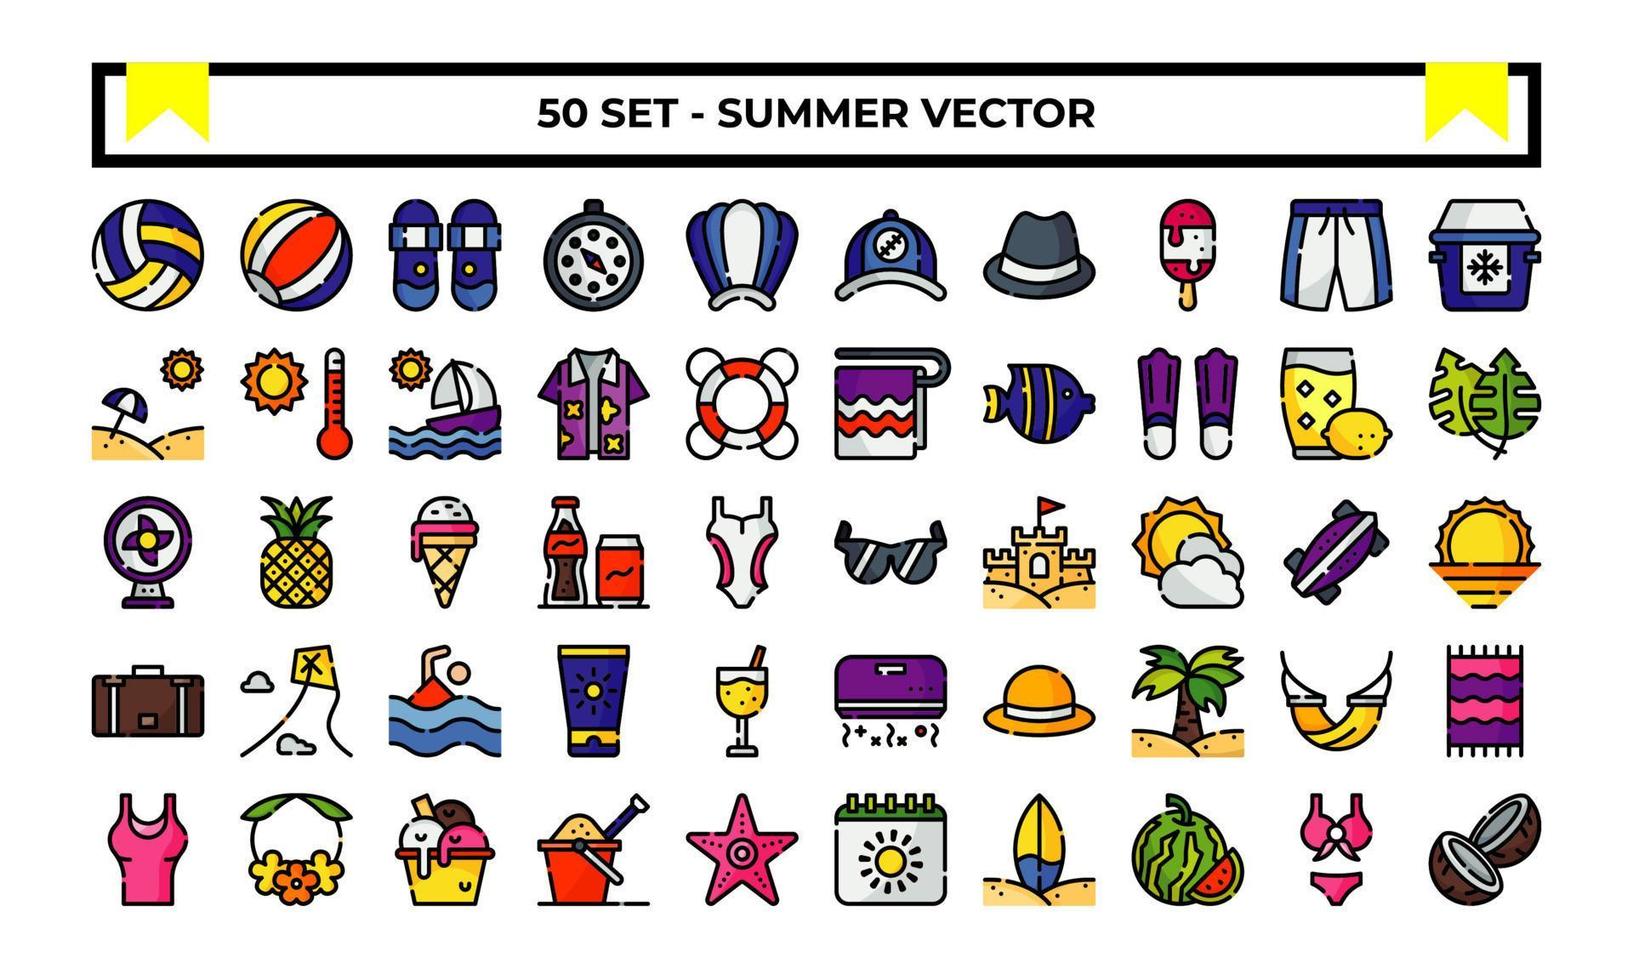 Summer icon set or logo illustration vector graphic with beach, sun, ball, sunglasses, etc. Perfect use for ui, website, pattern, design, etc.